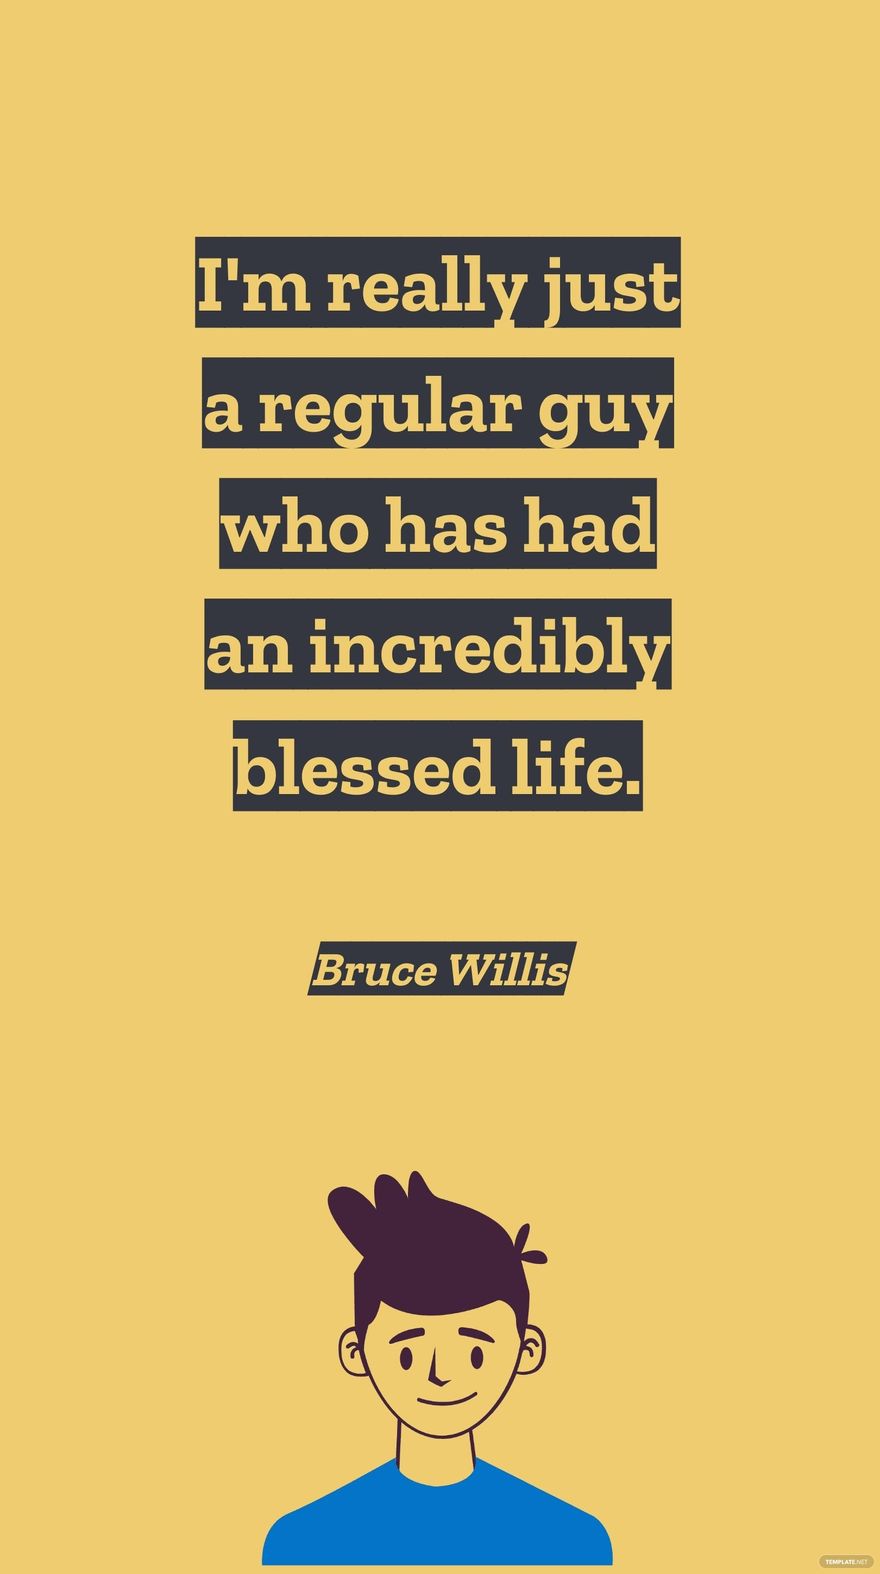 Free Bruce Willis - I'm really just a regular guy who has had an incredibly blessed life. in JPG